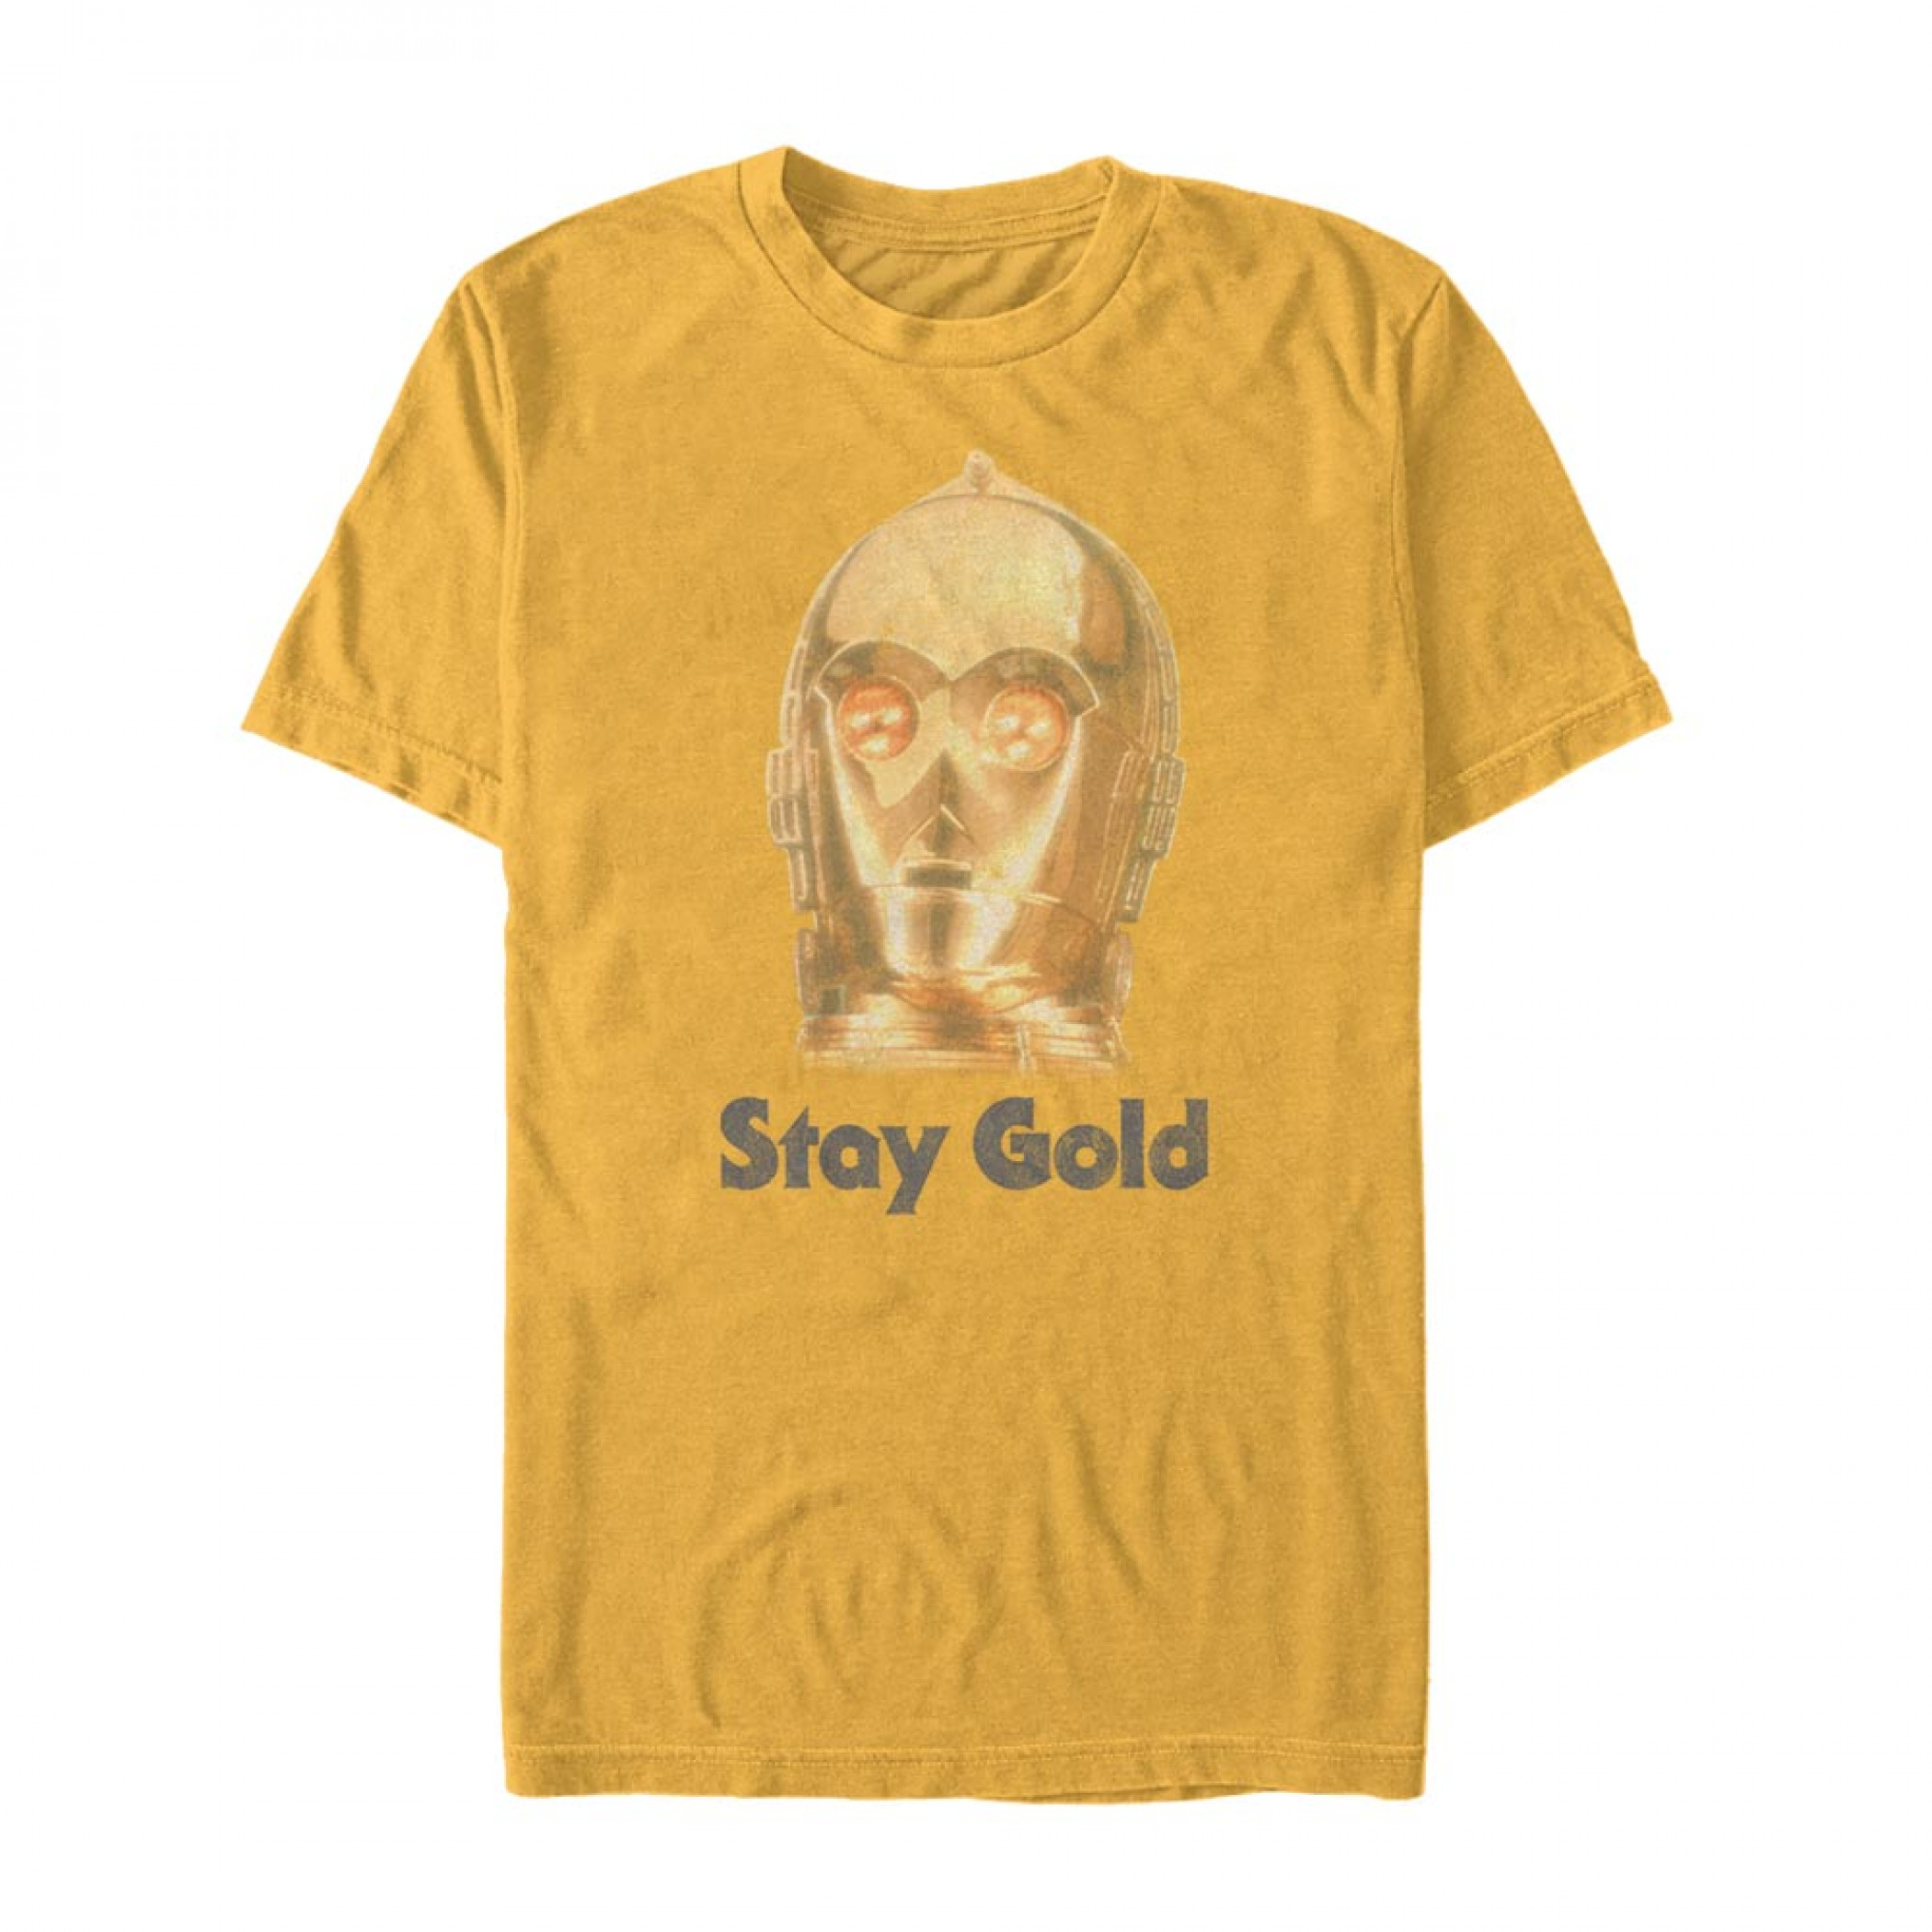 Star Wars The Rise of Skywalker C-3PO Stay Gold T-Shirt